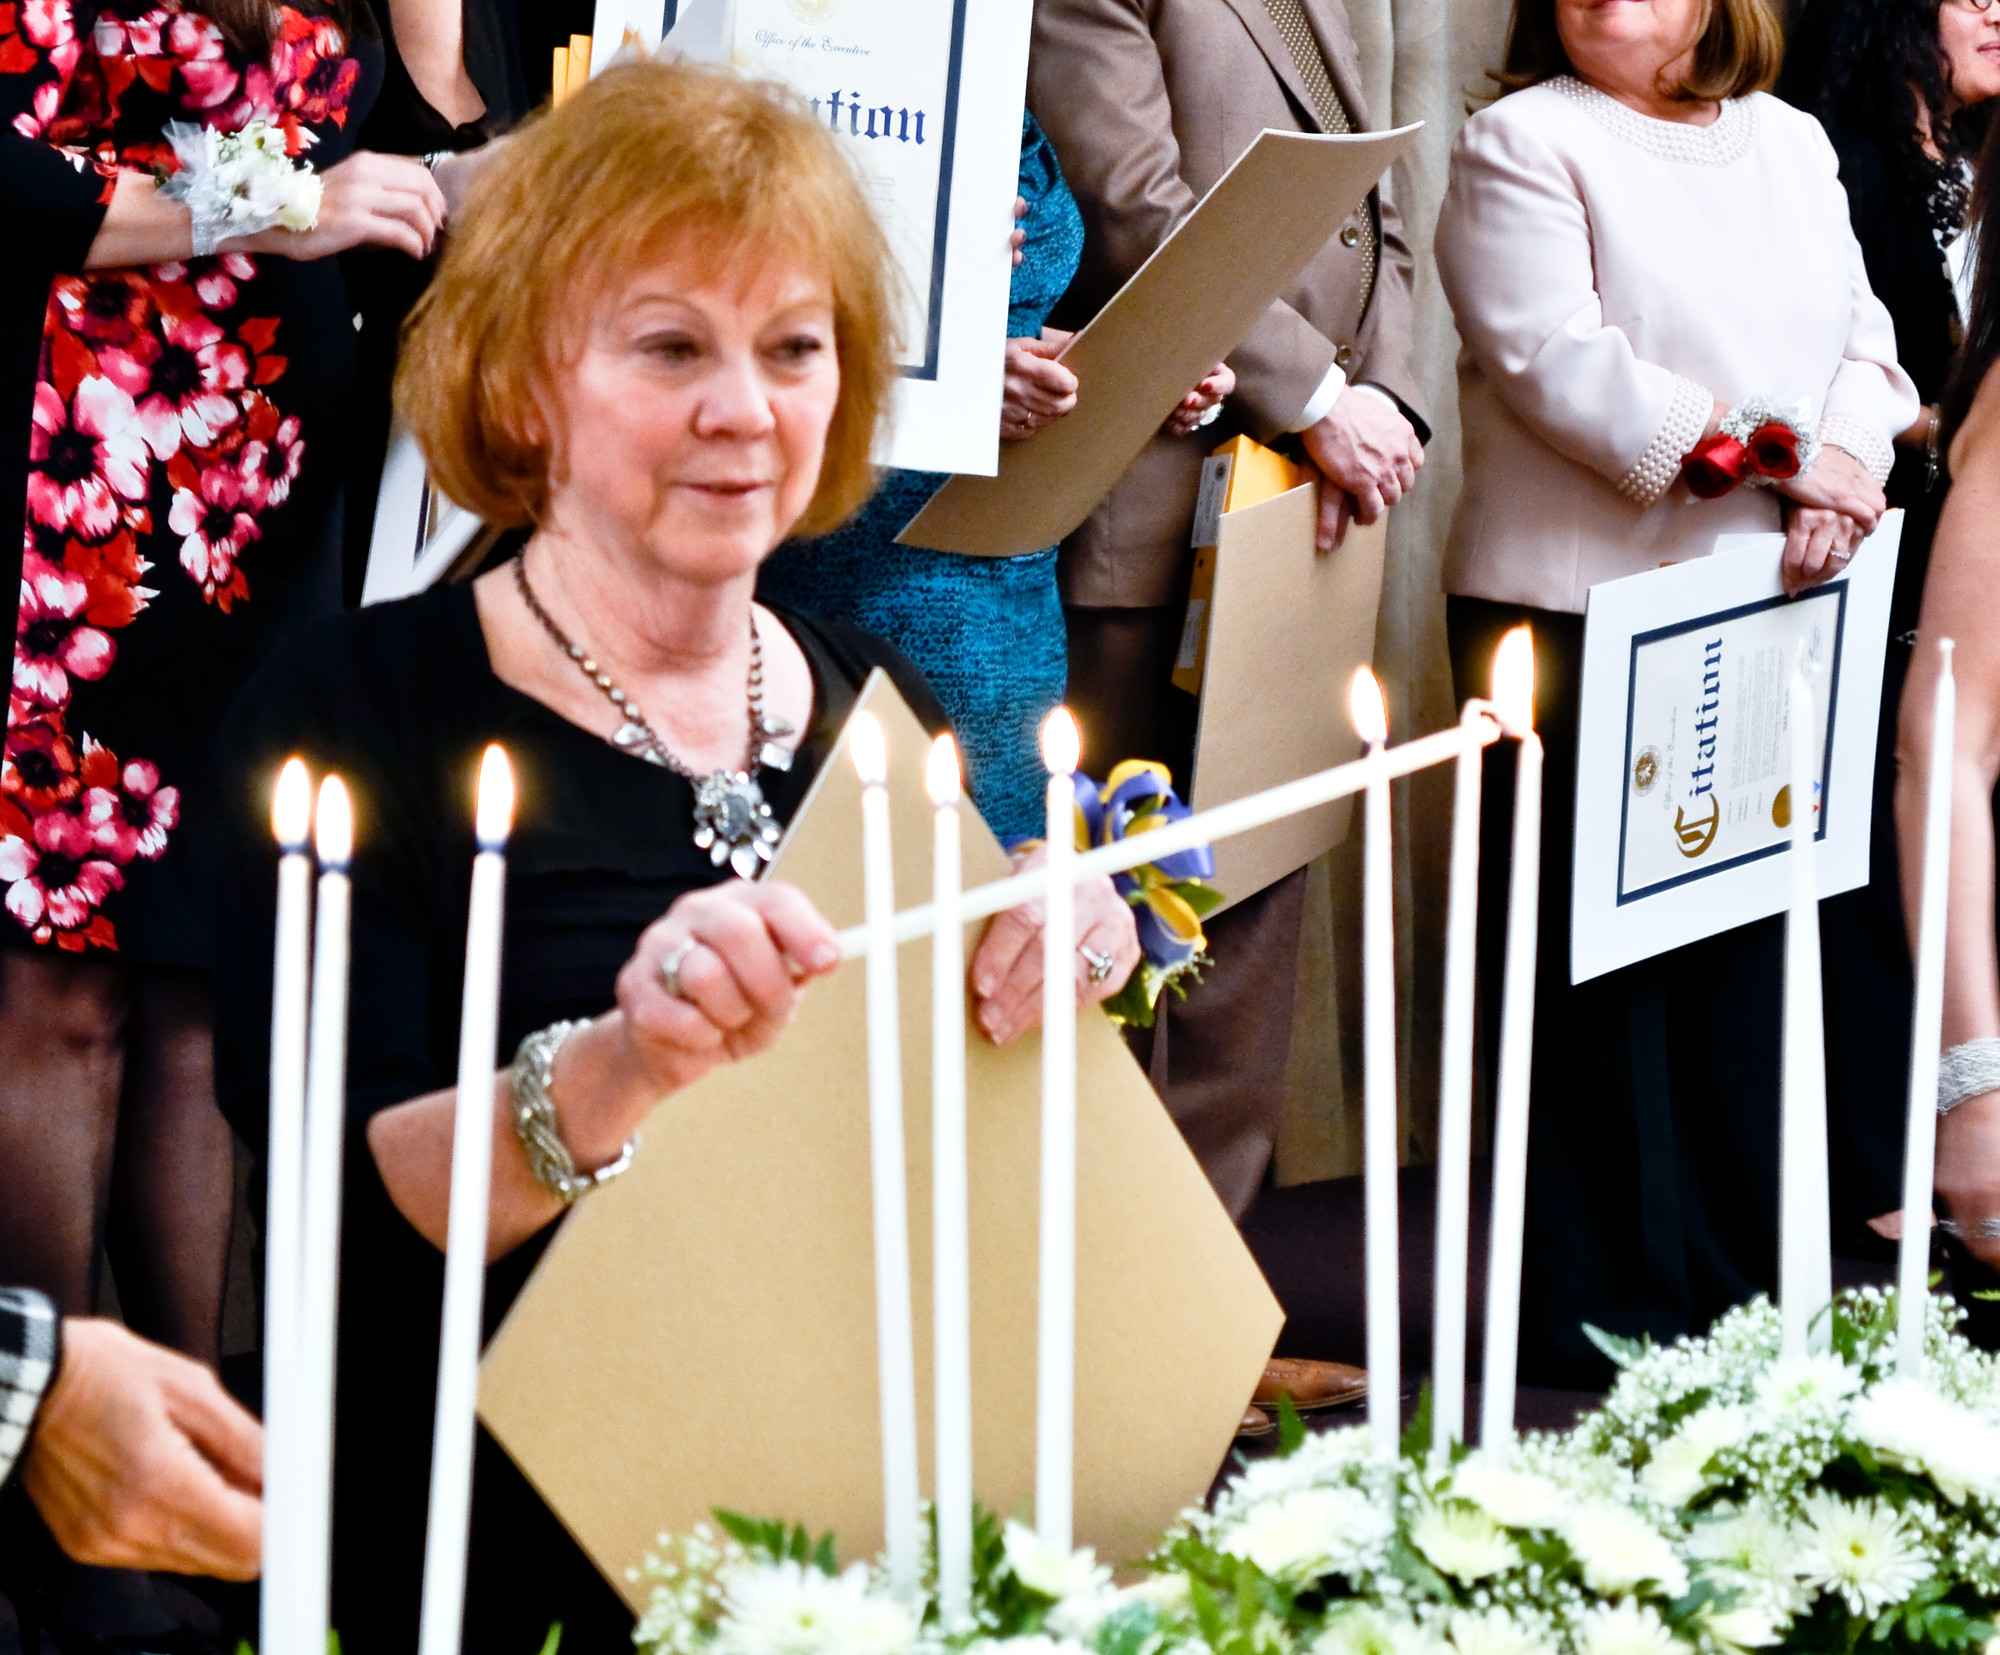 Susan Lennon, an honoree from East Meadow High School’s PTA, lit a candle after her name was called.